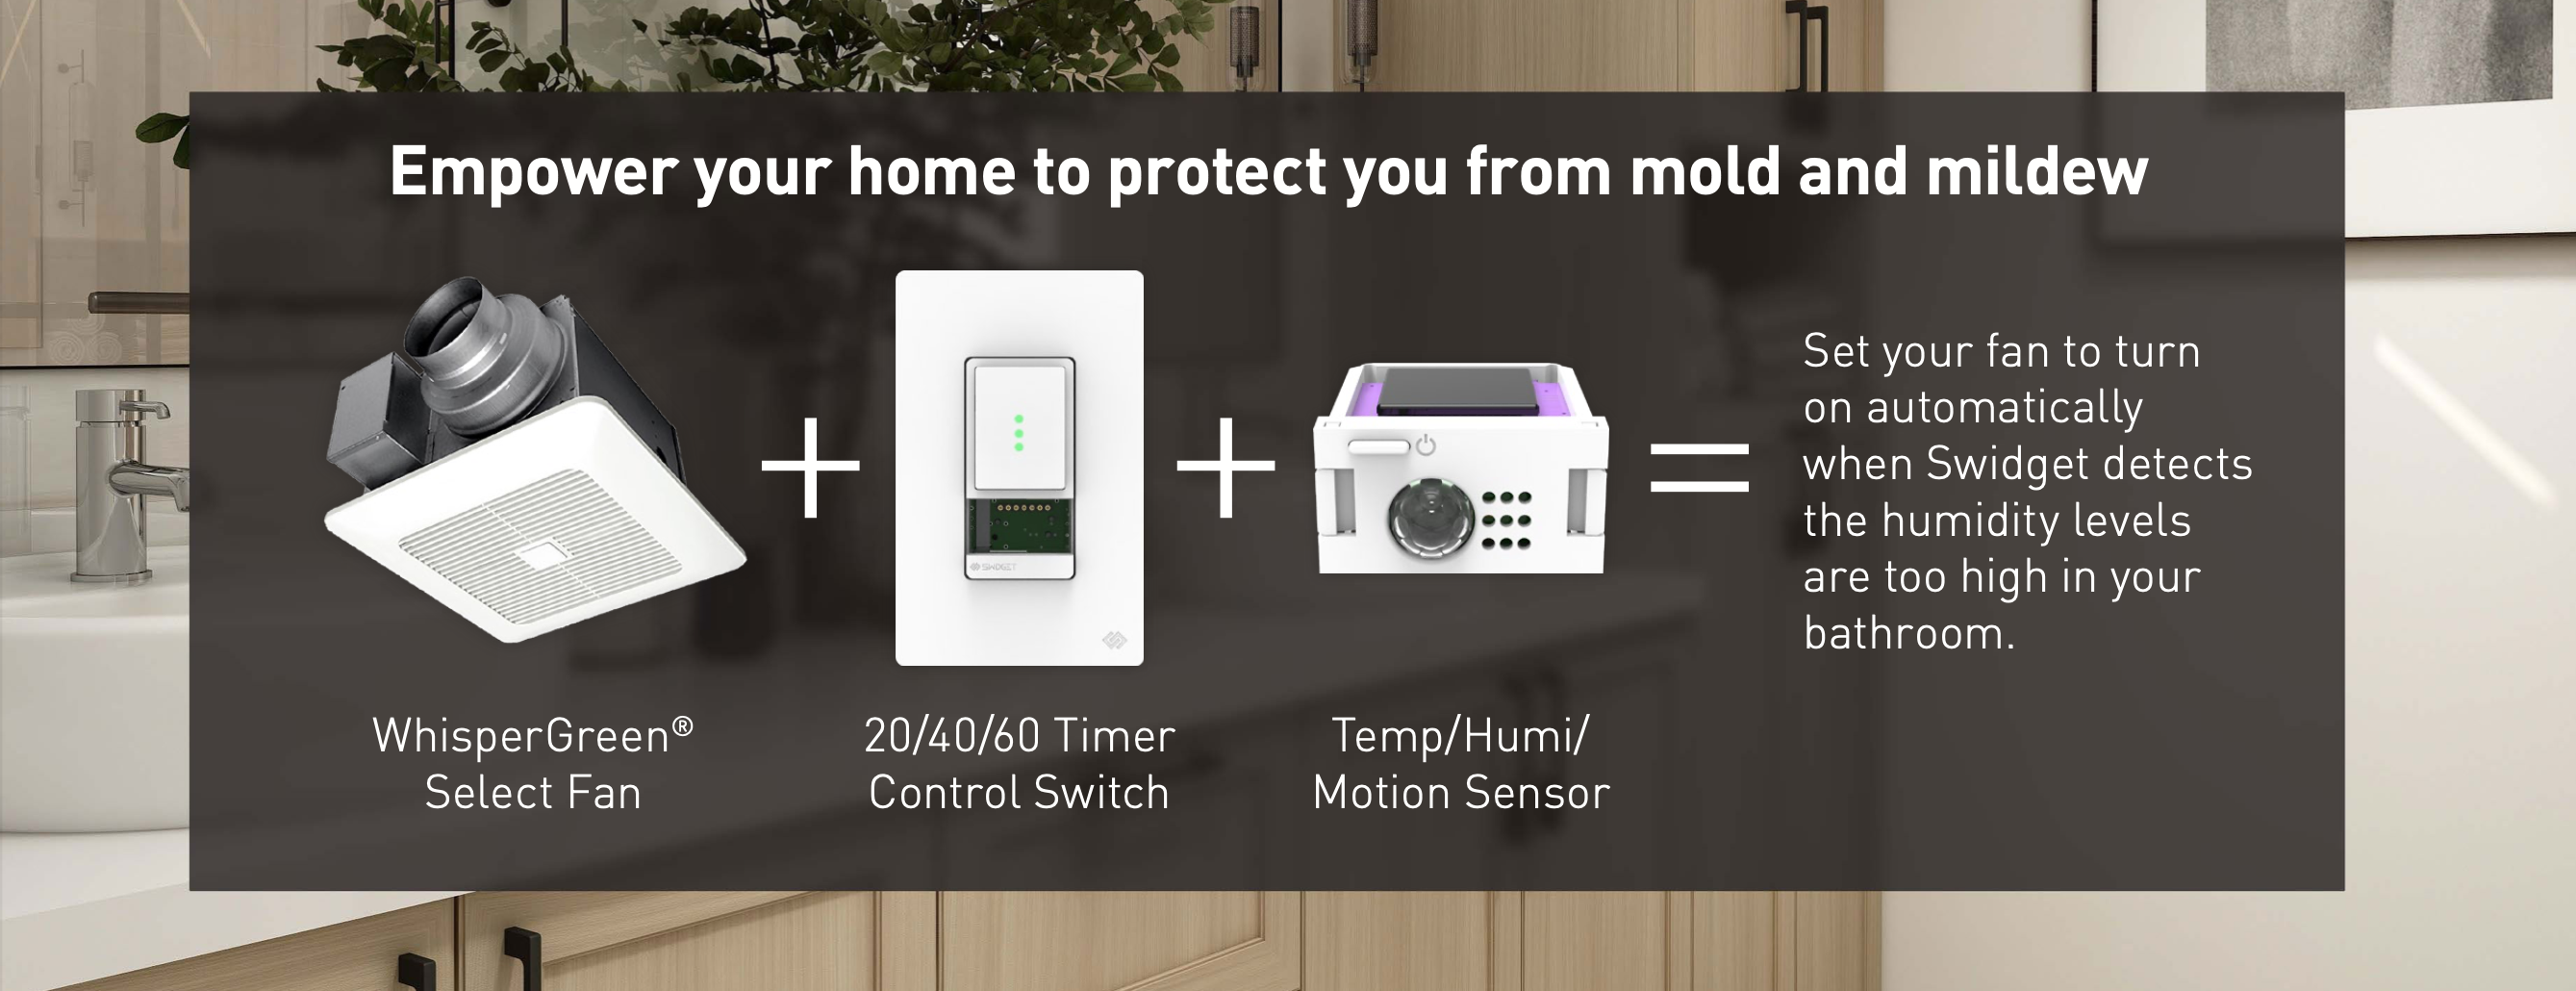 Panasonic swidget protects from mold and mildew